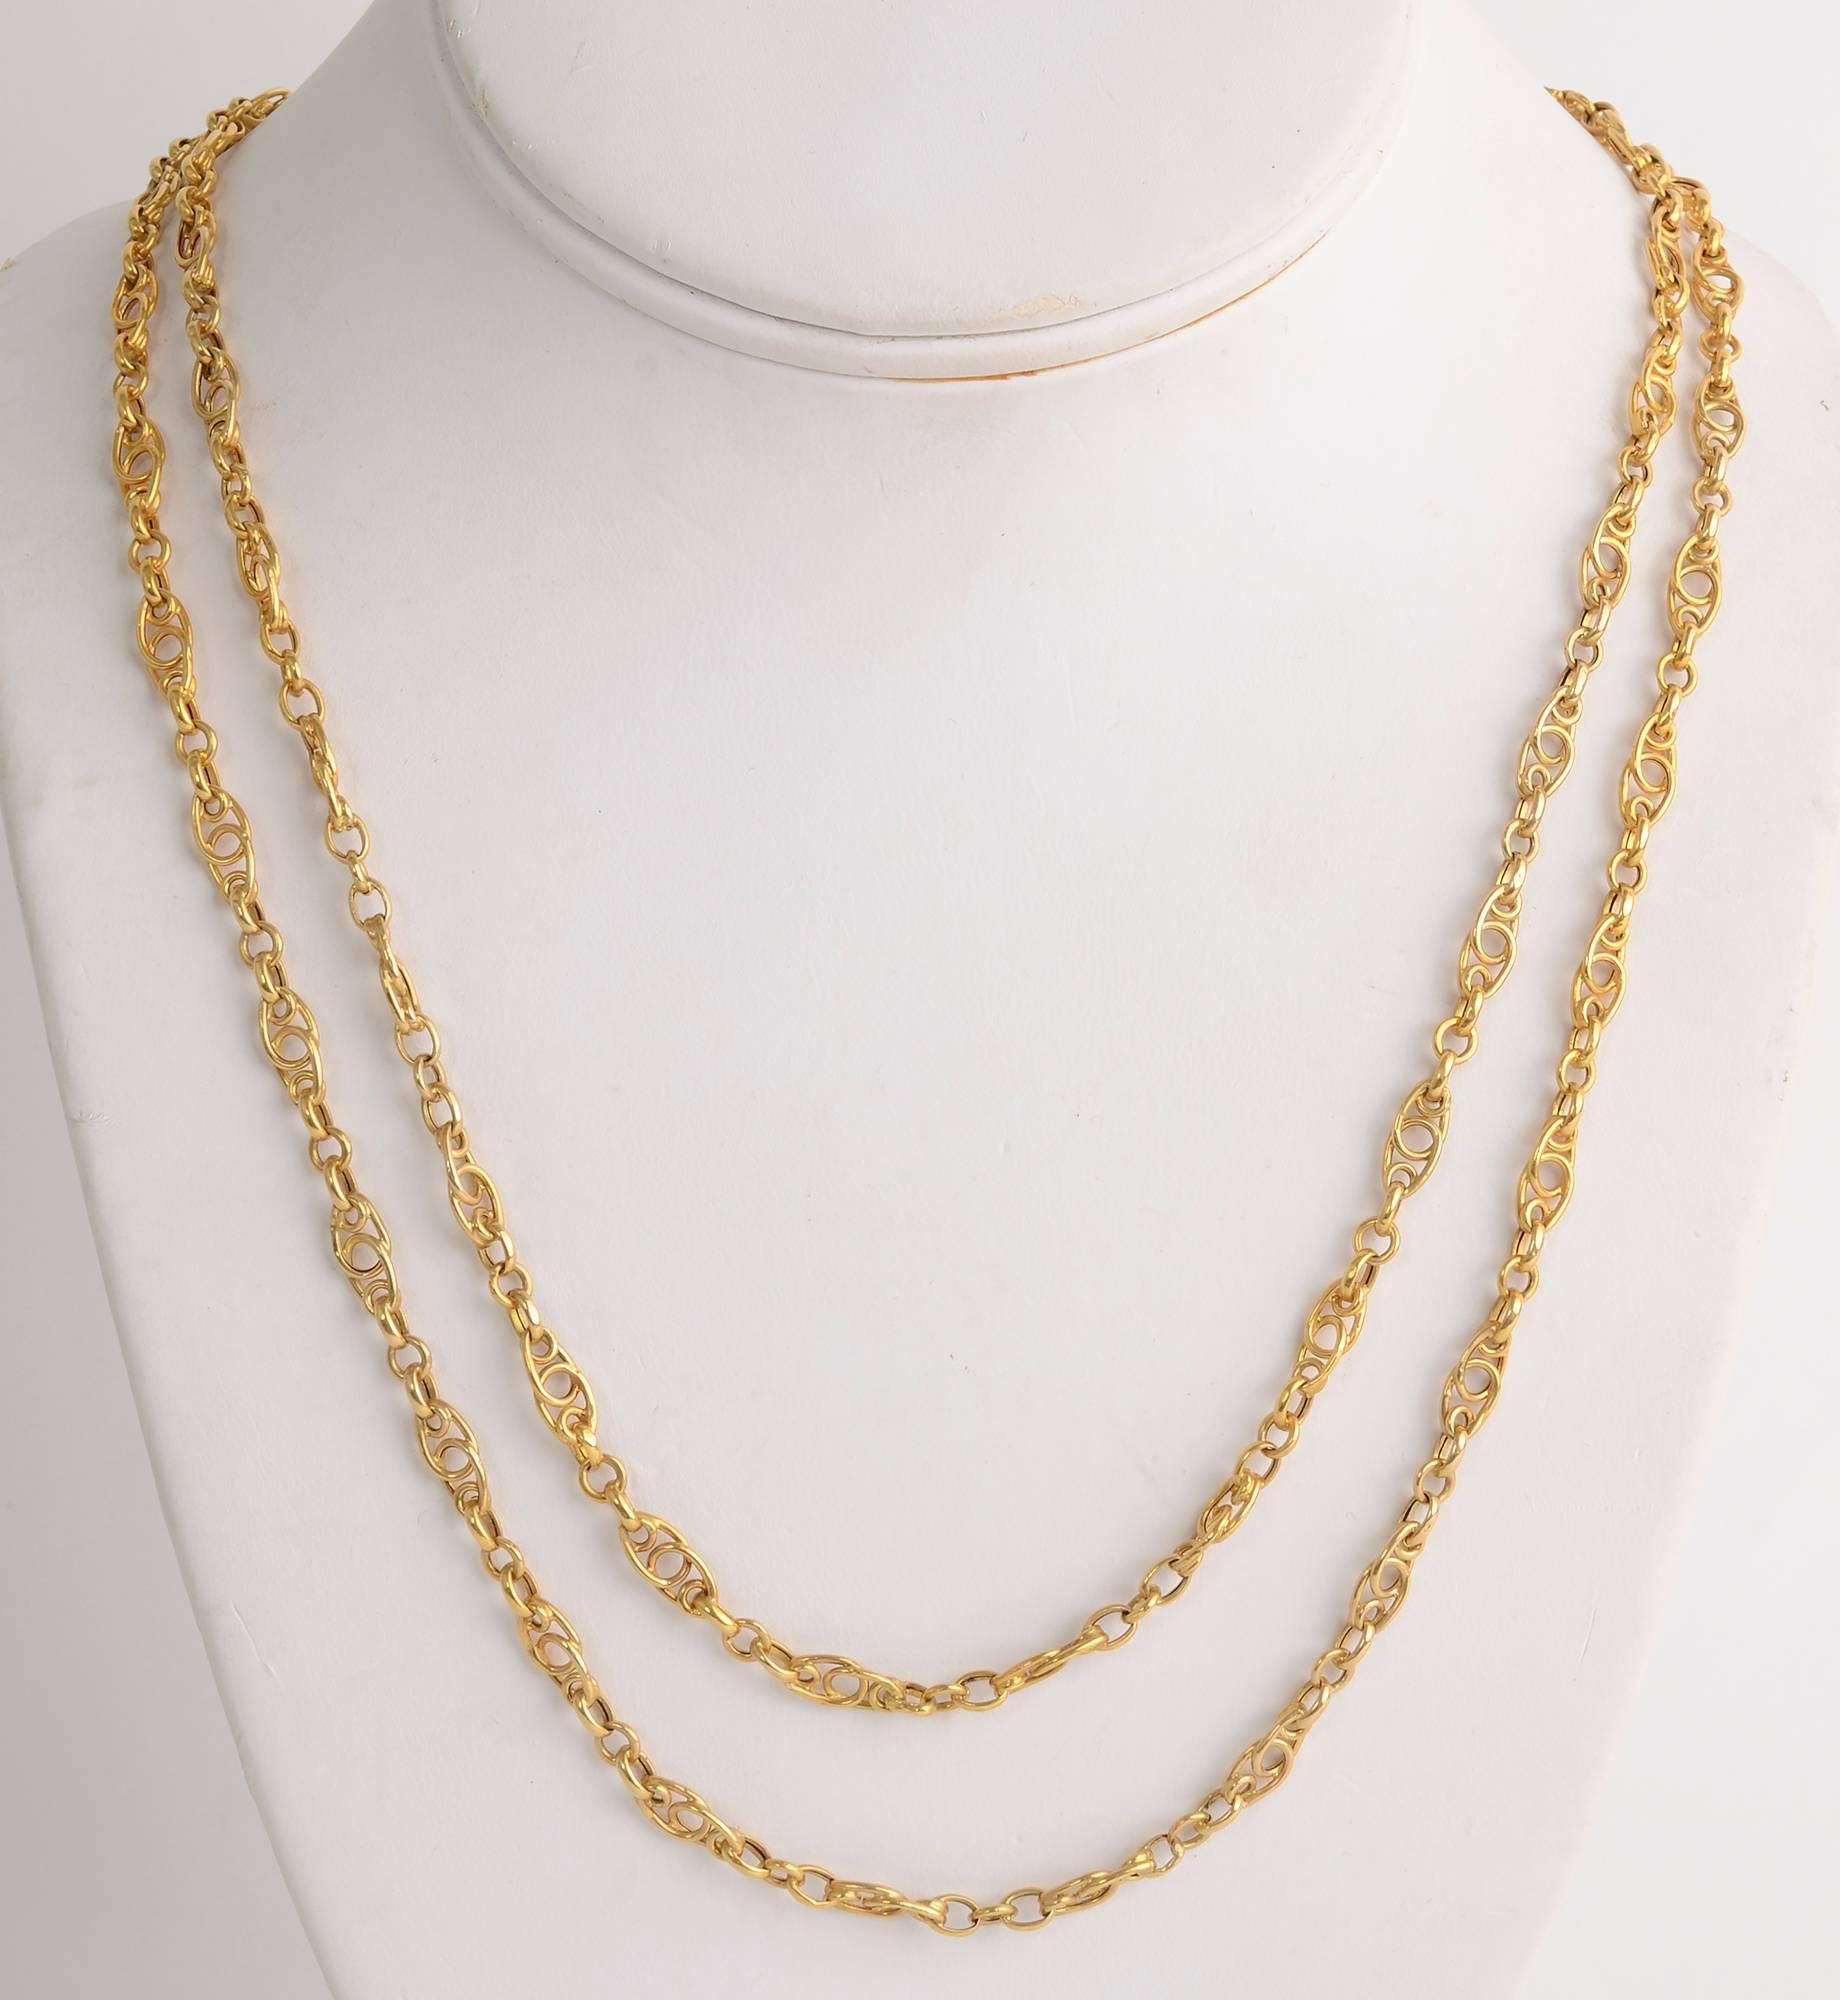 Finely made 18 karat gold chain necklace that is 61 inches in length. It has both a jump ring clasp and a watch chain clasp so it can be worn in multiple lengths. The links are overlapping ovals that form circles and curlicues. Each link is 3/16